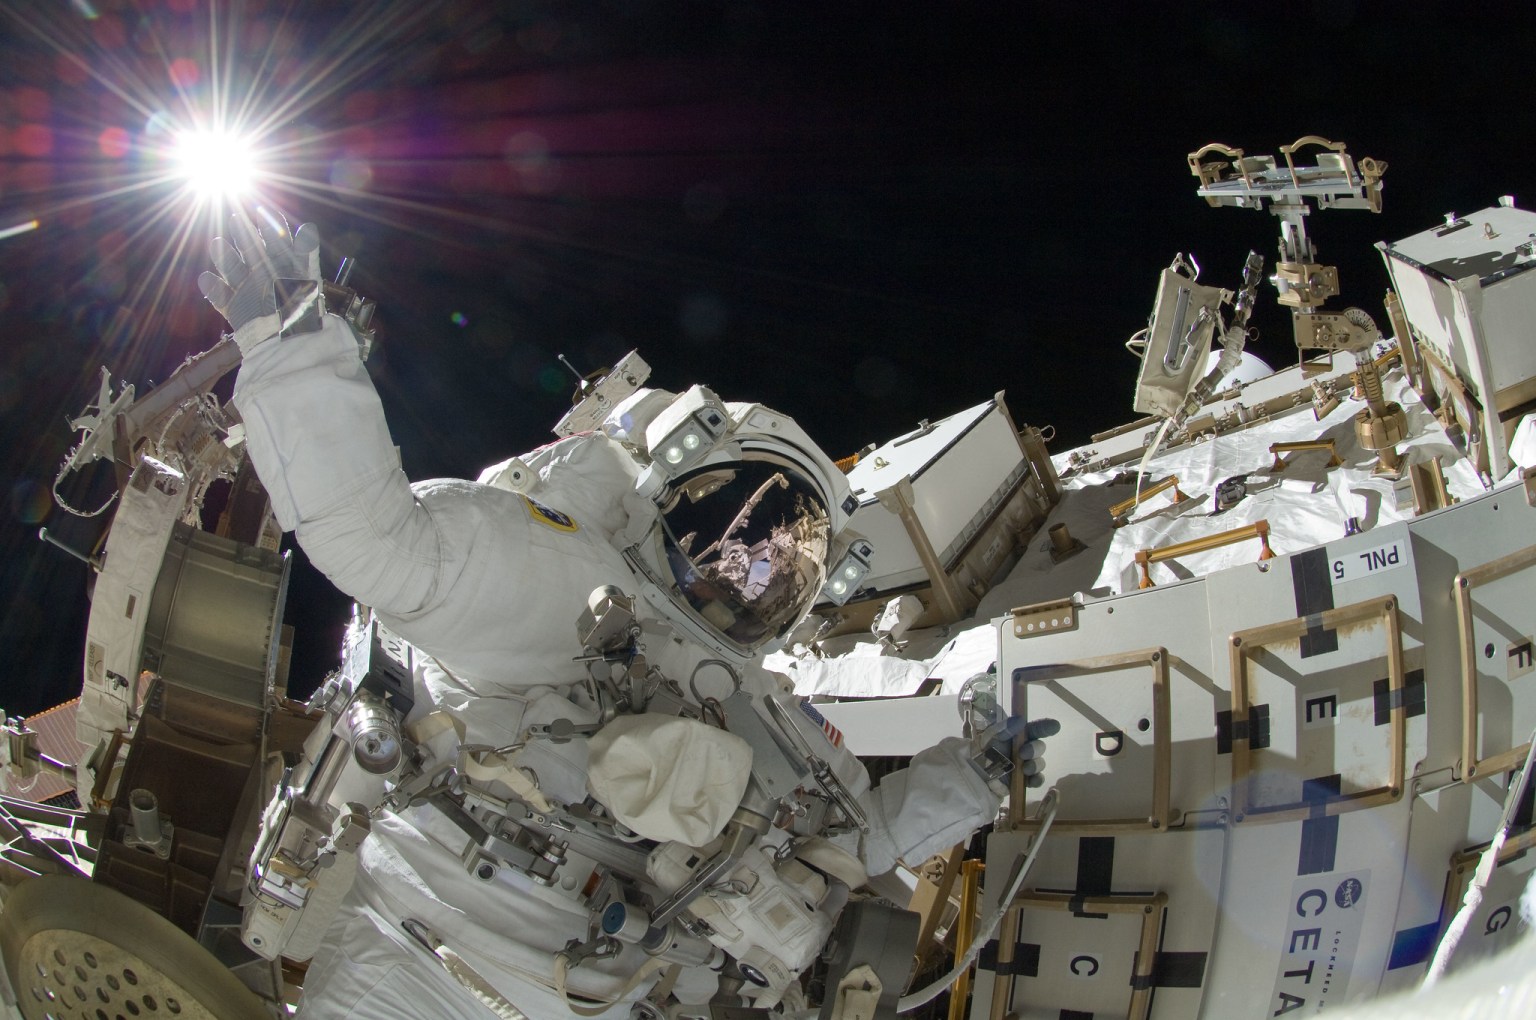  NASA astronaut Sunita Williams, Expedition 32 flight engineer, appears to touch the bright sun during the mission's third session of extravehicular activity (EVA).